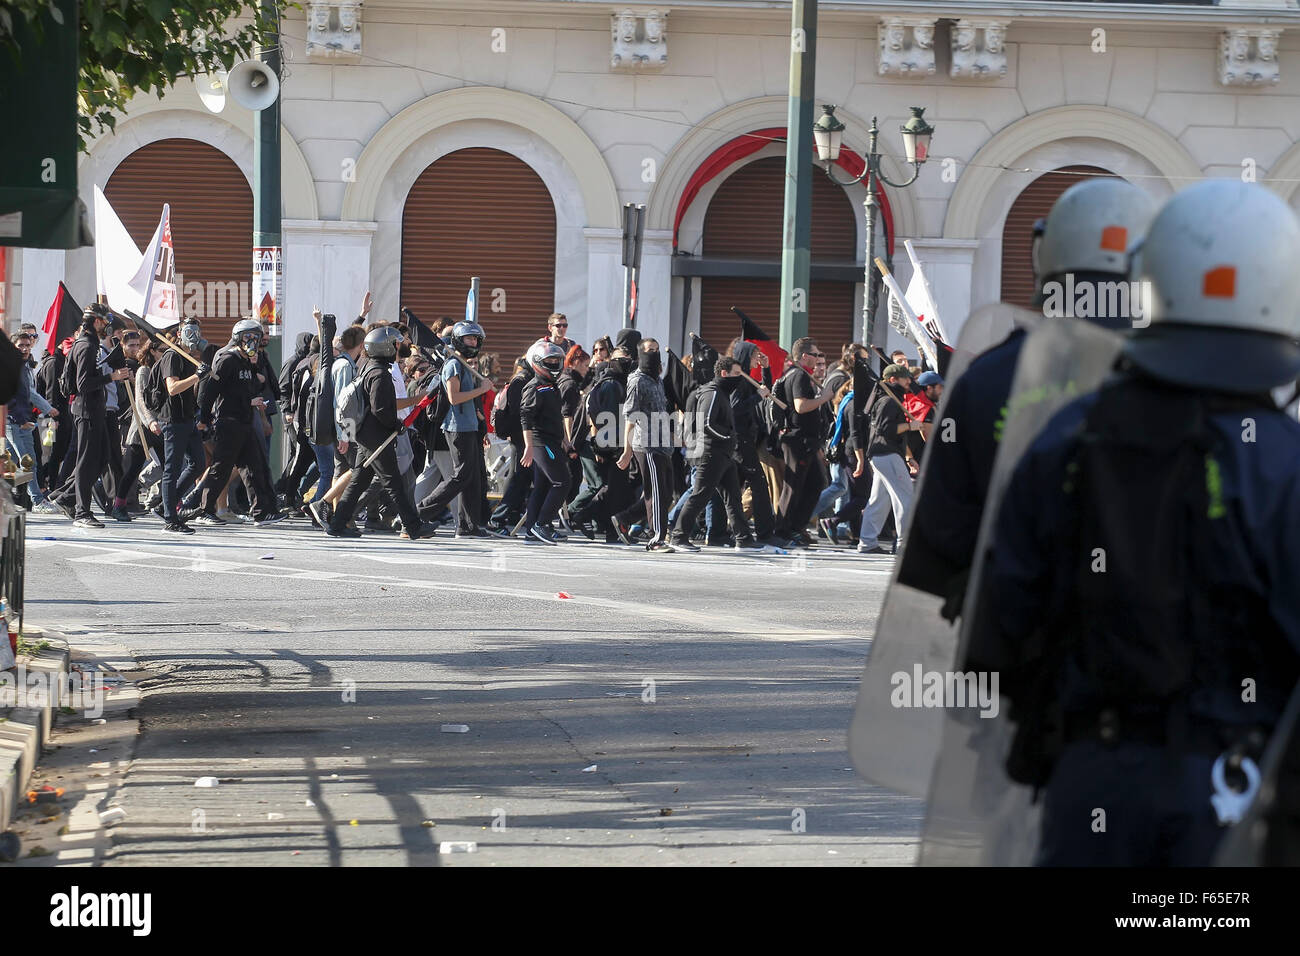 Athens, Greece, November, 12 2015: Clashes have broken out between riot police and youths at a demonstration in central Athens during the general strike. Credit:  VASILIS VERVERIDIS/Alamy Live News Stock Photo